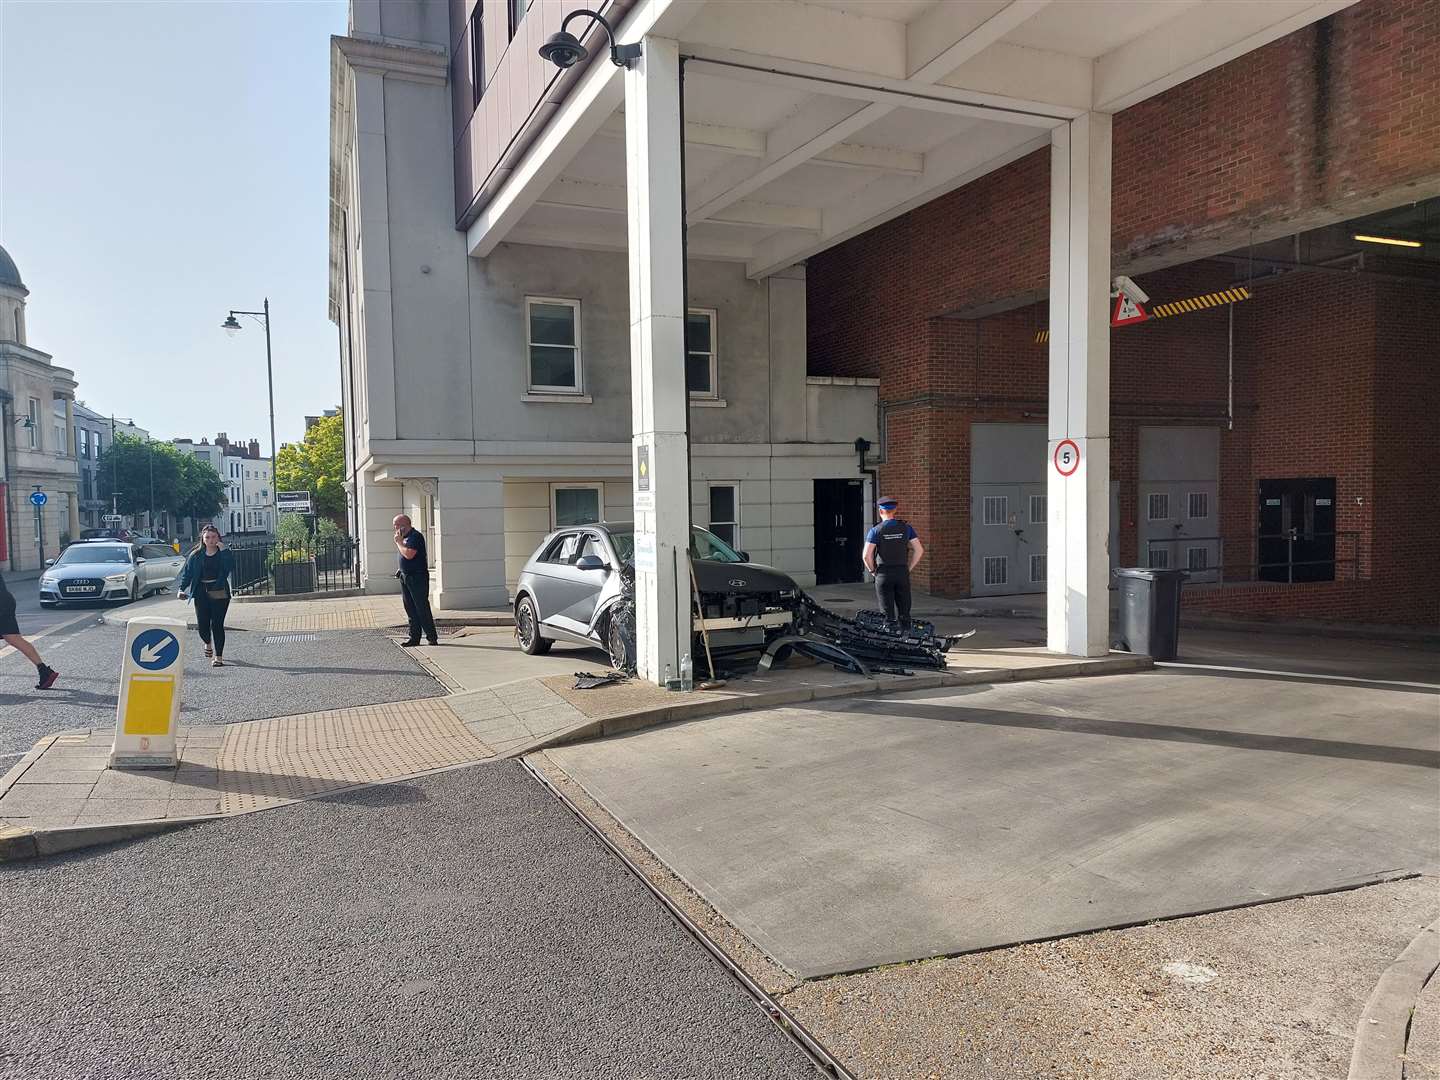 The vehicle was left blocking the service entrance to Fenwick's. Photo: Jack Dyson/KM